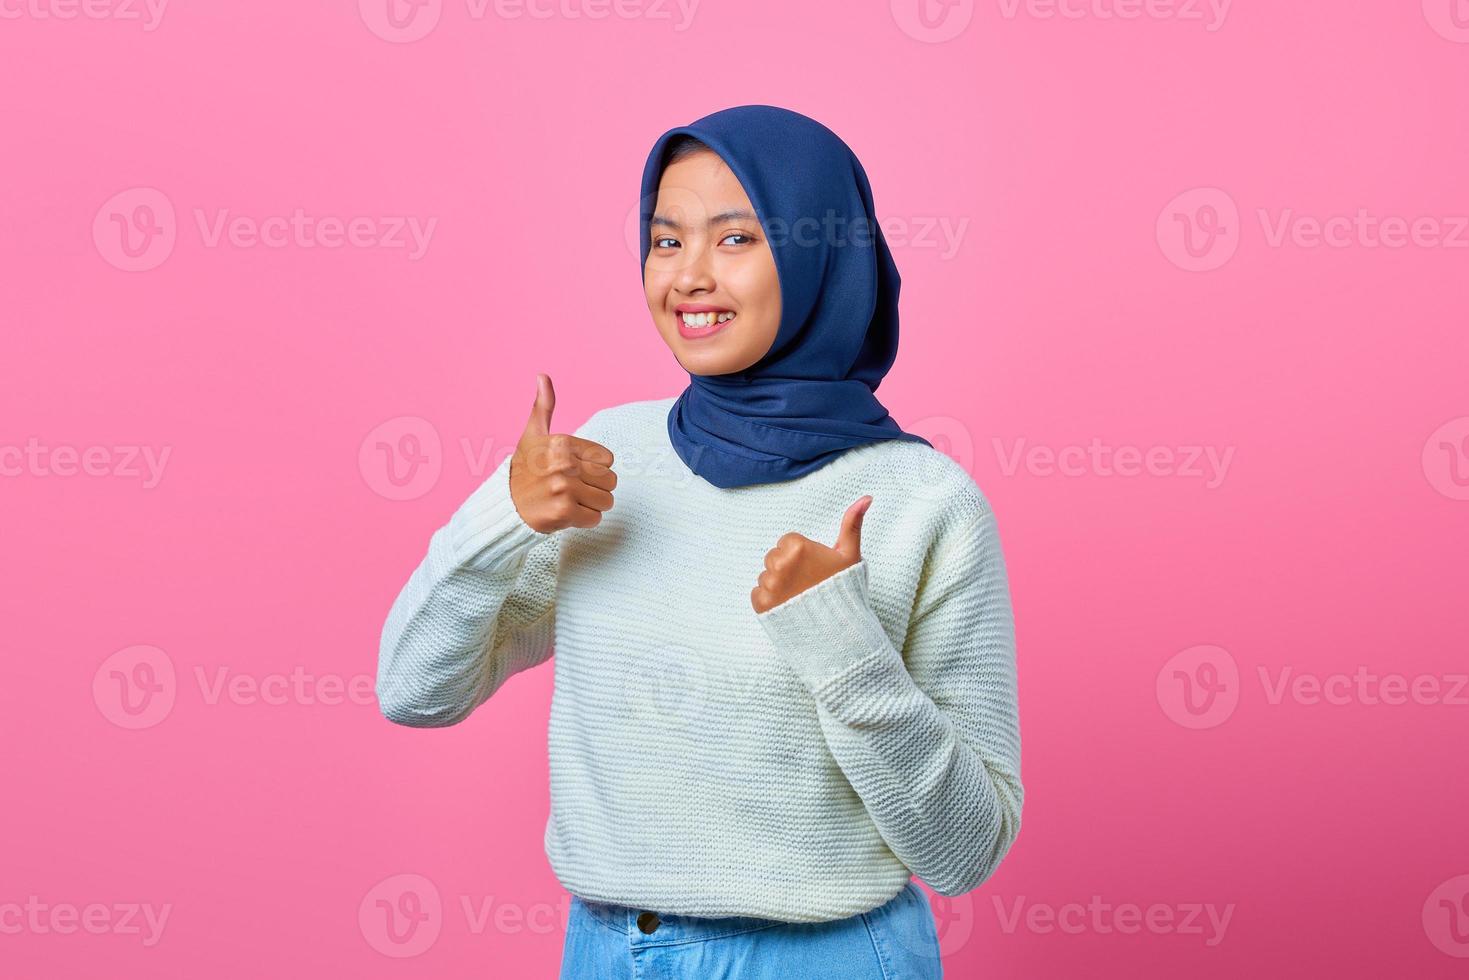 Portrait of smiling beautiful Asian woman showing thumbs up or approval sign photo